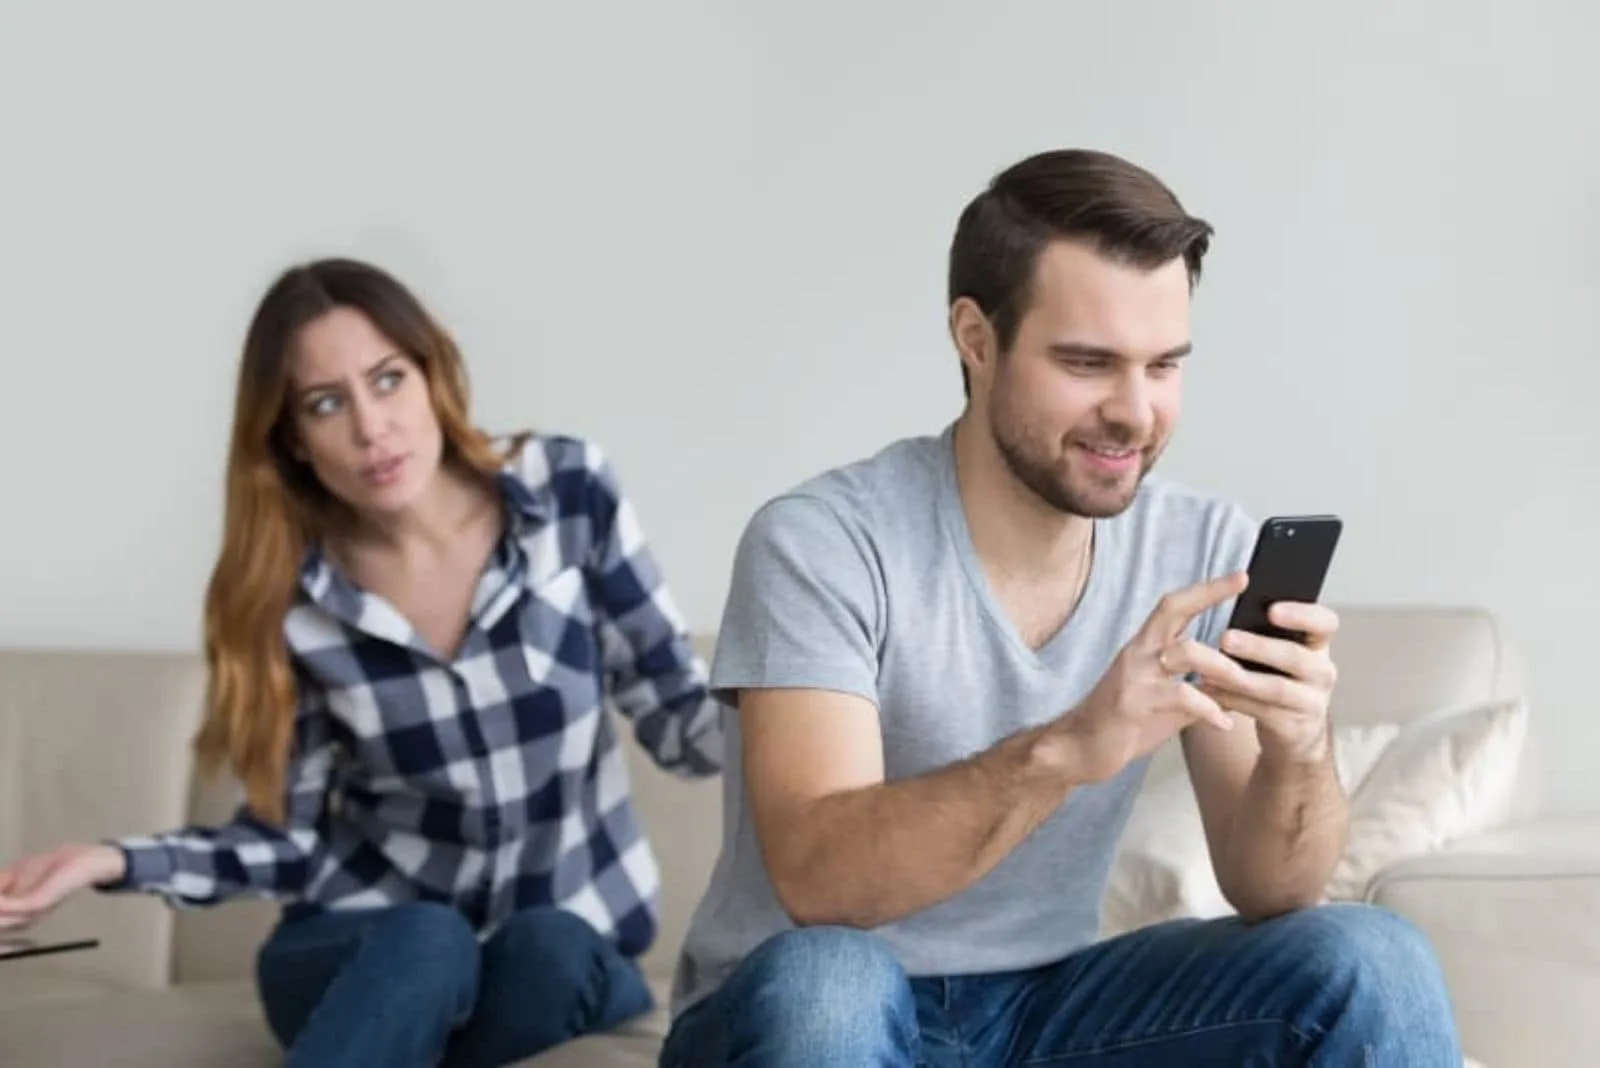 nervous woman while man holding phone